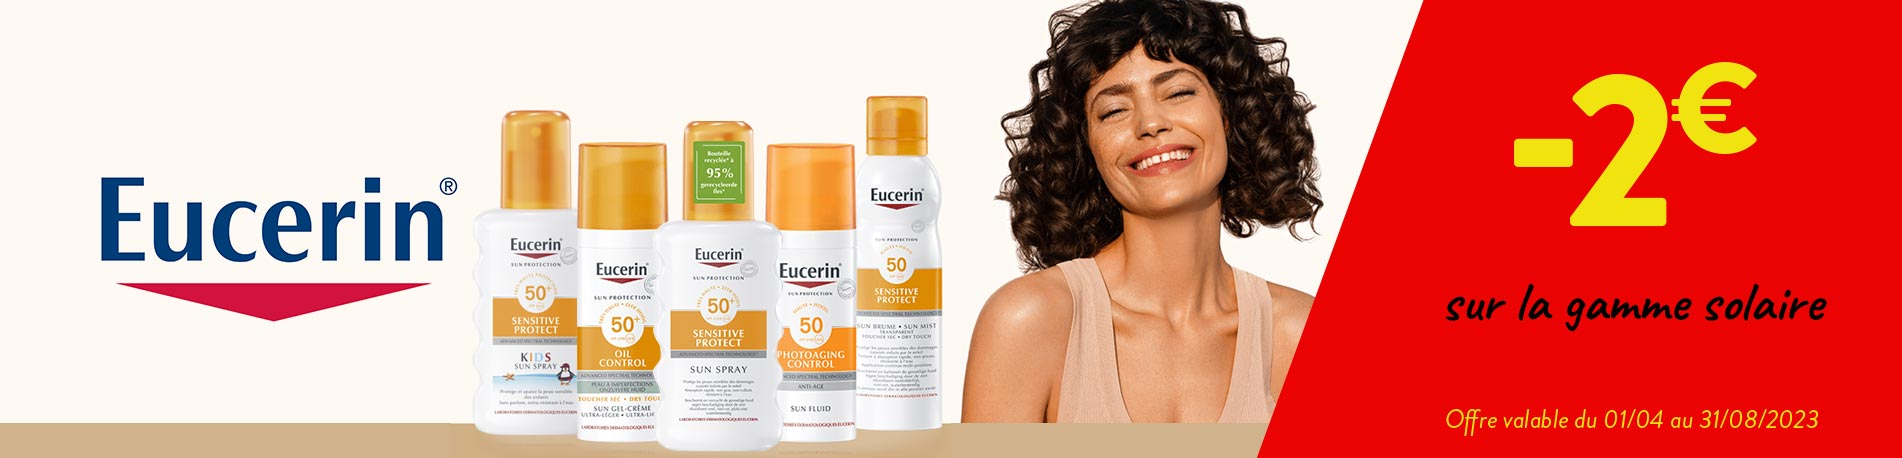 Promotion Eucerin solaires